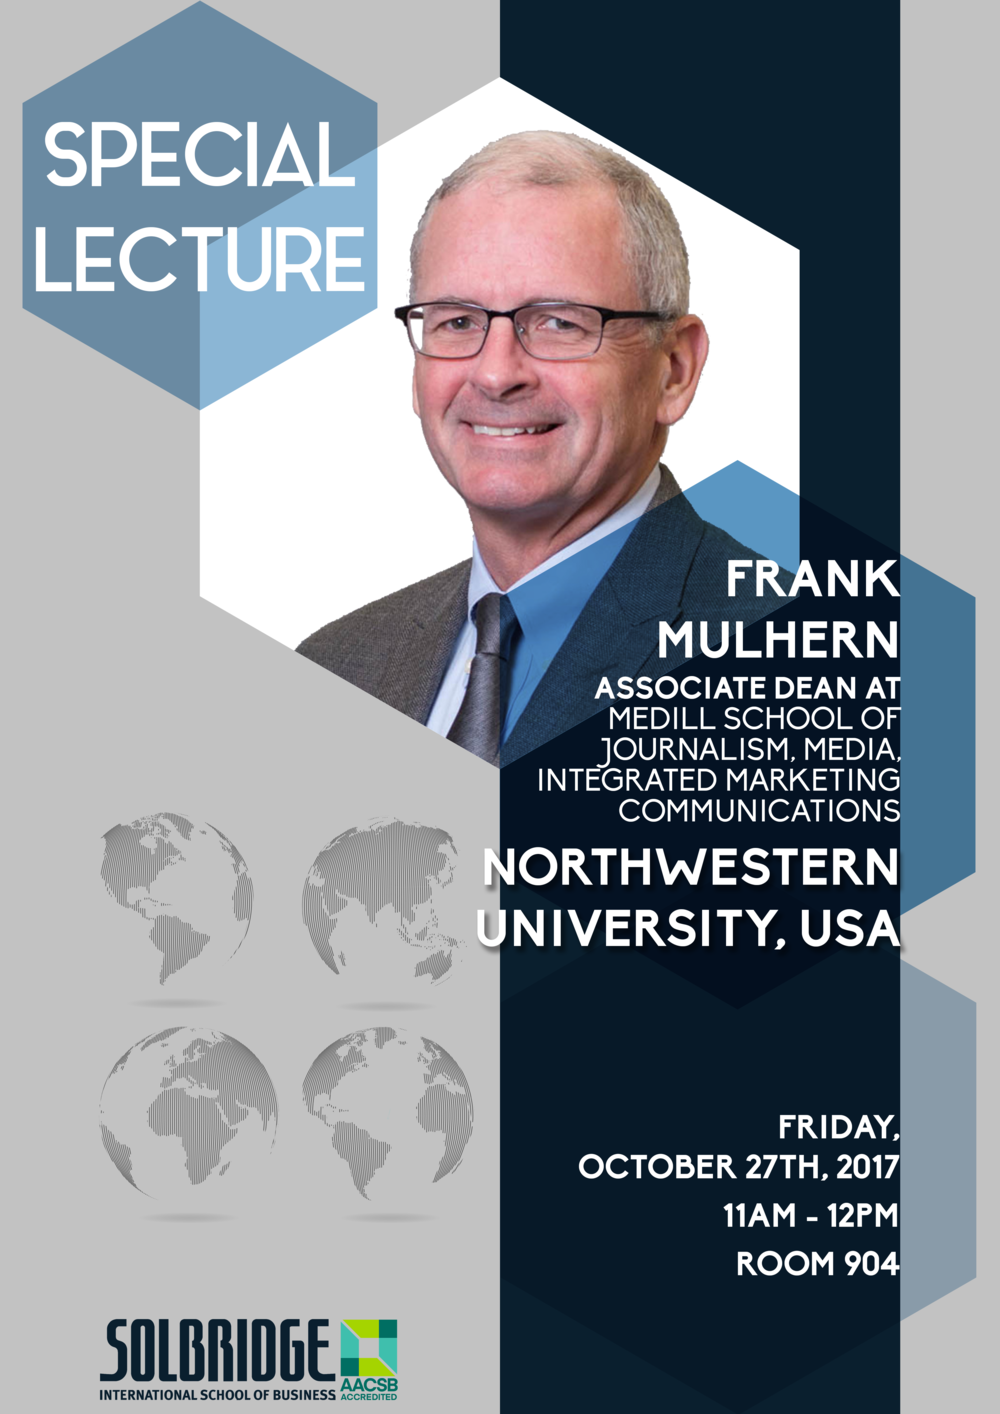 Special lecture by Frank Mulhern (Ph.D.) the Associate Dean of Medill School of Journalism, Media, Integrated Marketing Communications at Northwestern University, USA